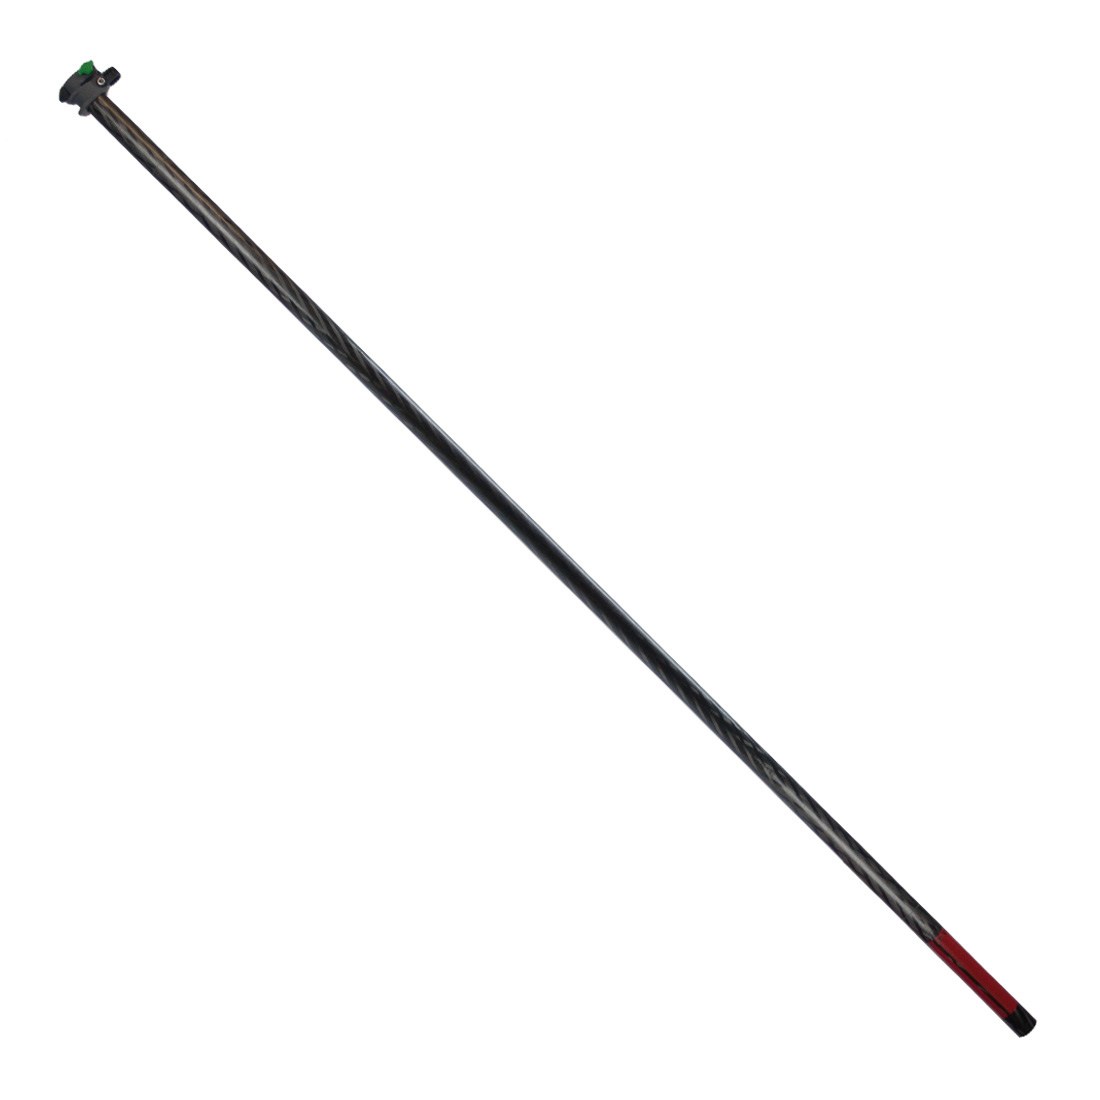 Unger nLite HiMod Carbon Extension Pole Replacement Section - Tilted Left Front View